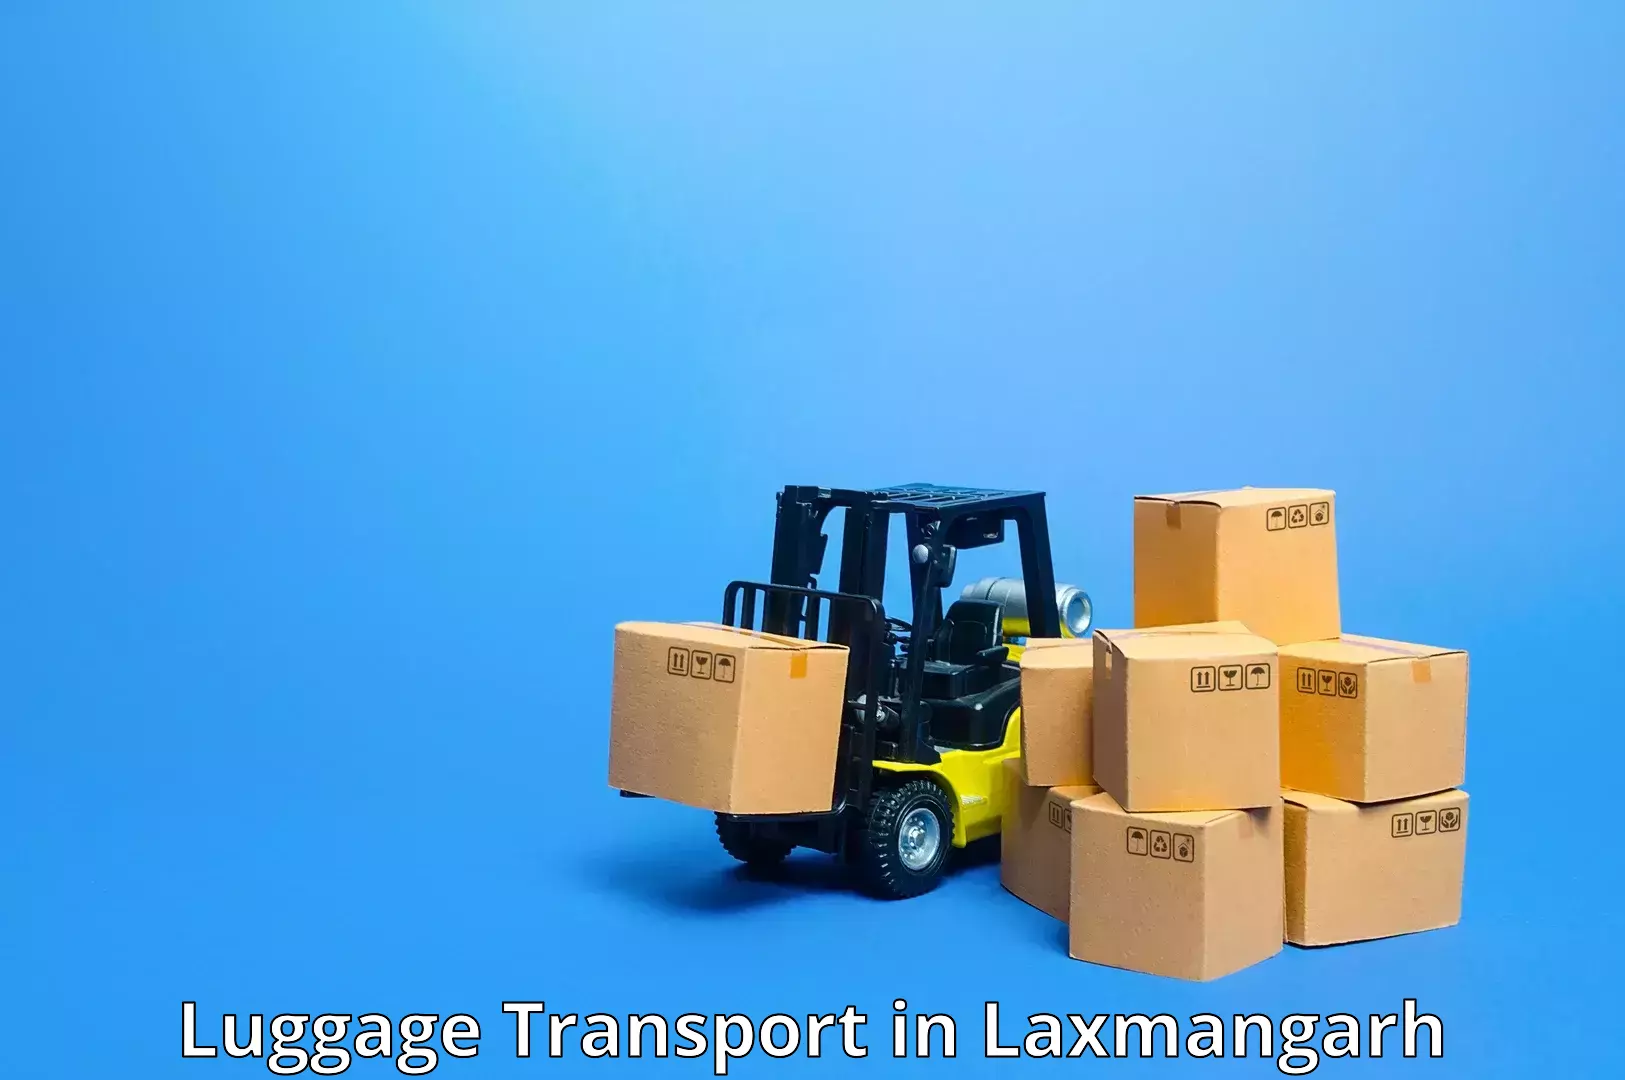 Luggage shipping consultation in Laxmangarh